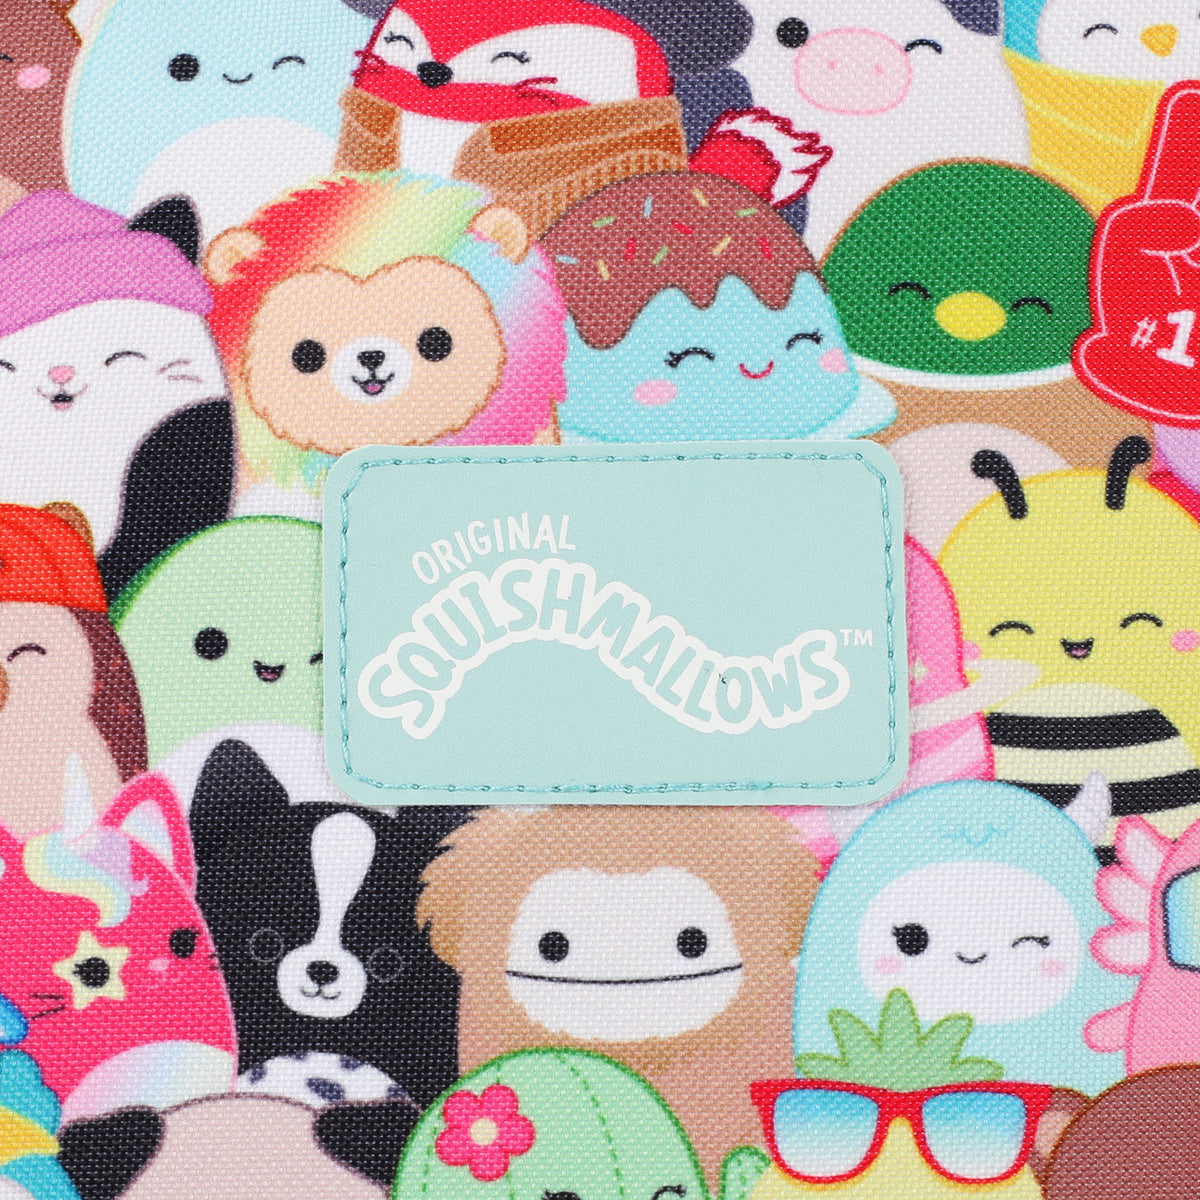 Squishmallows Character Party Kids Backpack